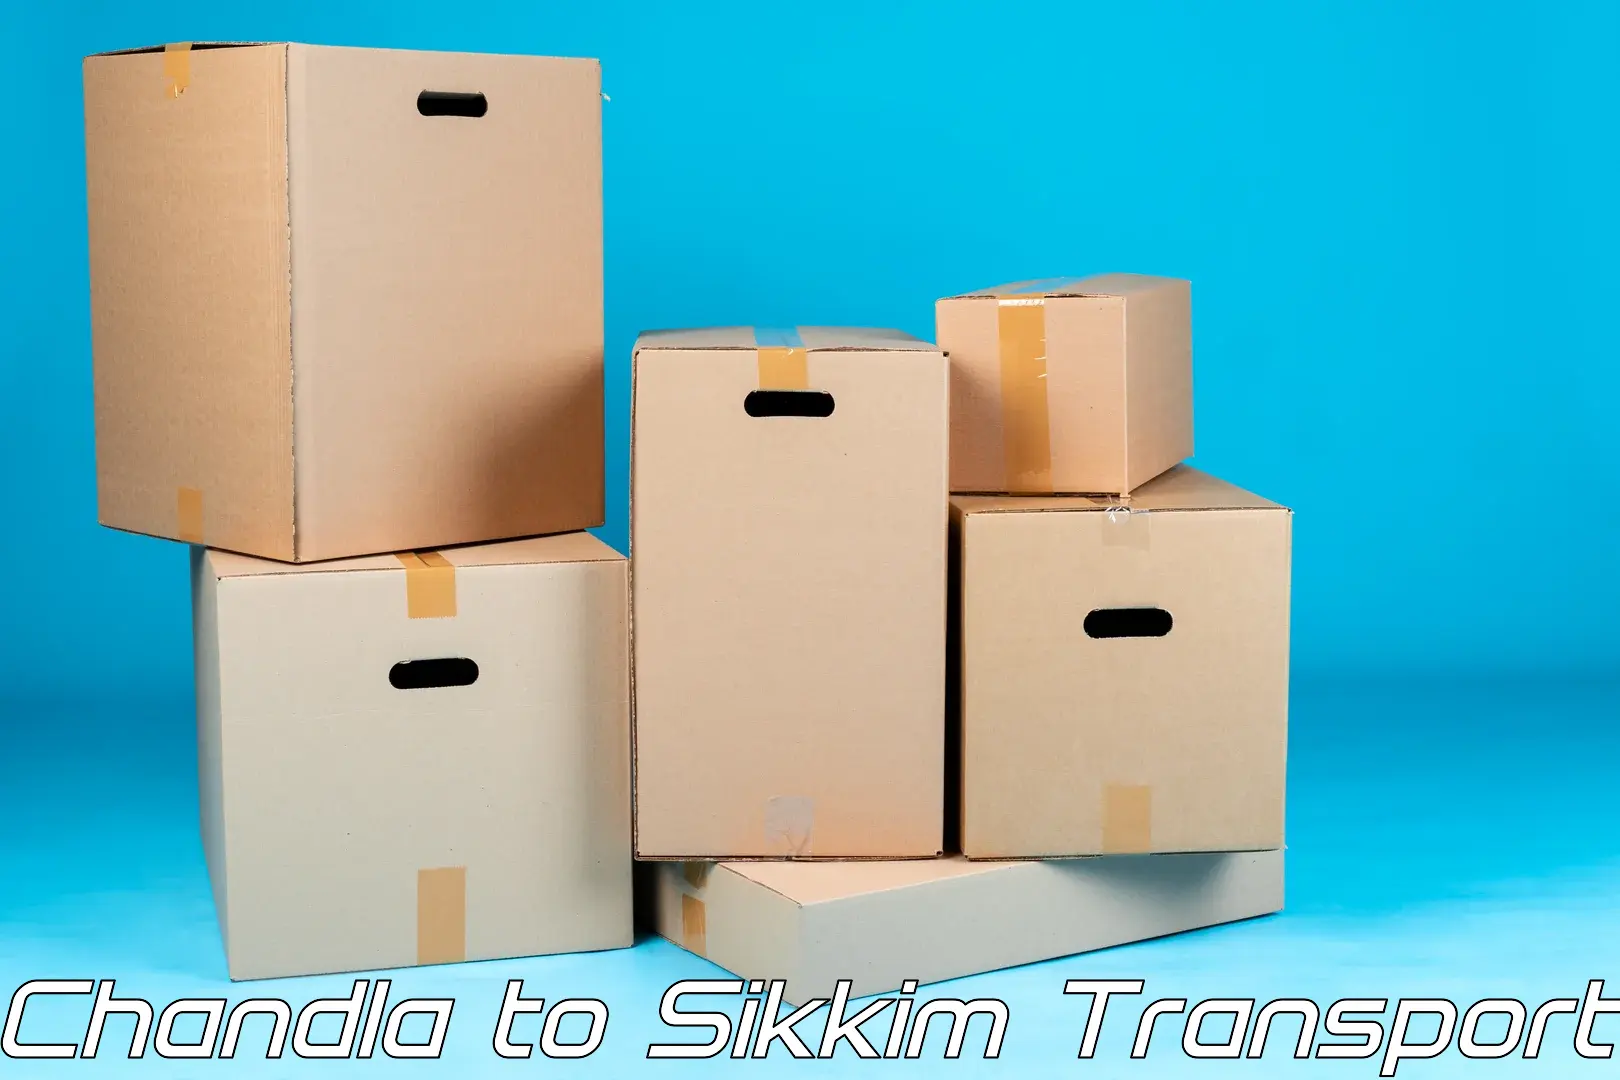 Goods delivery service Chandla to Sikkim